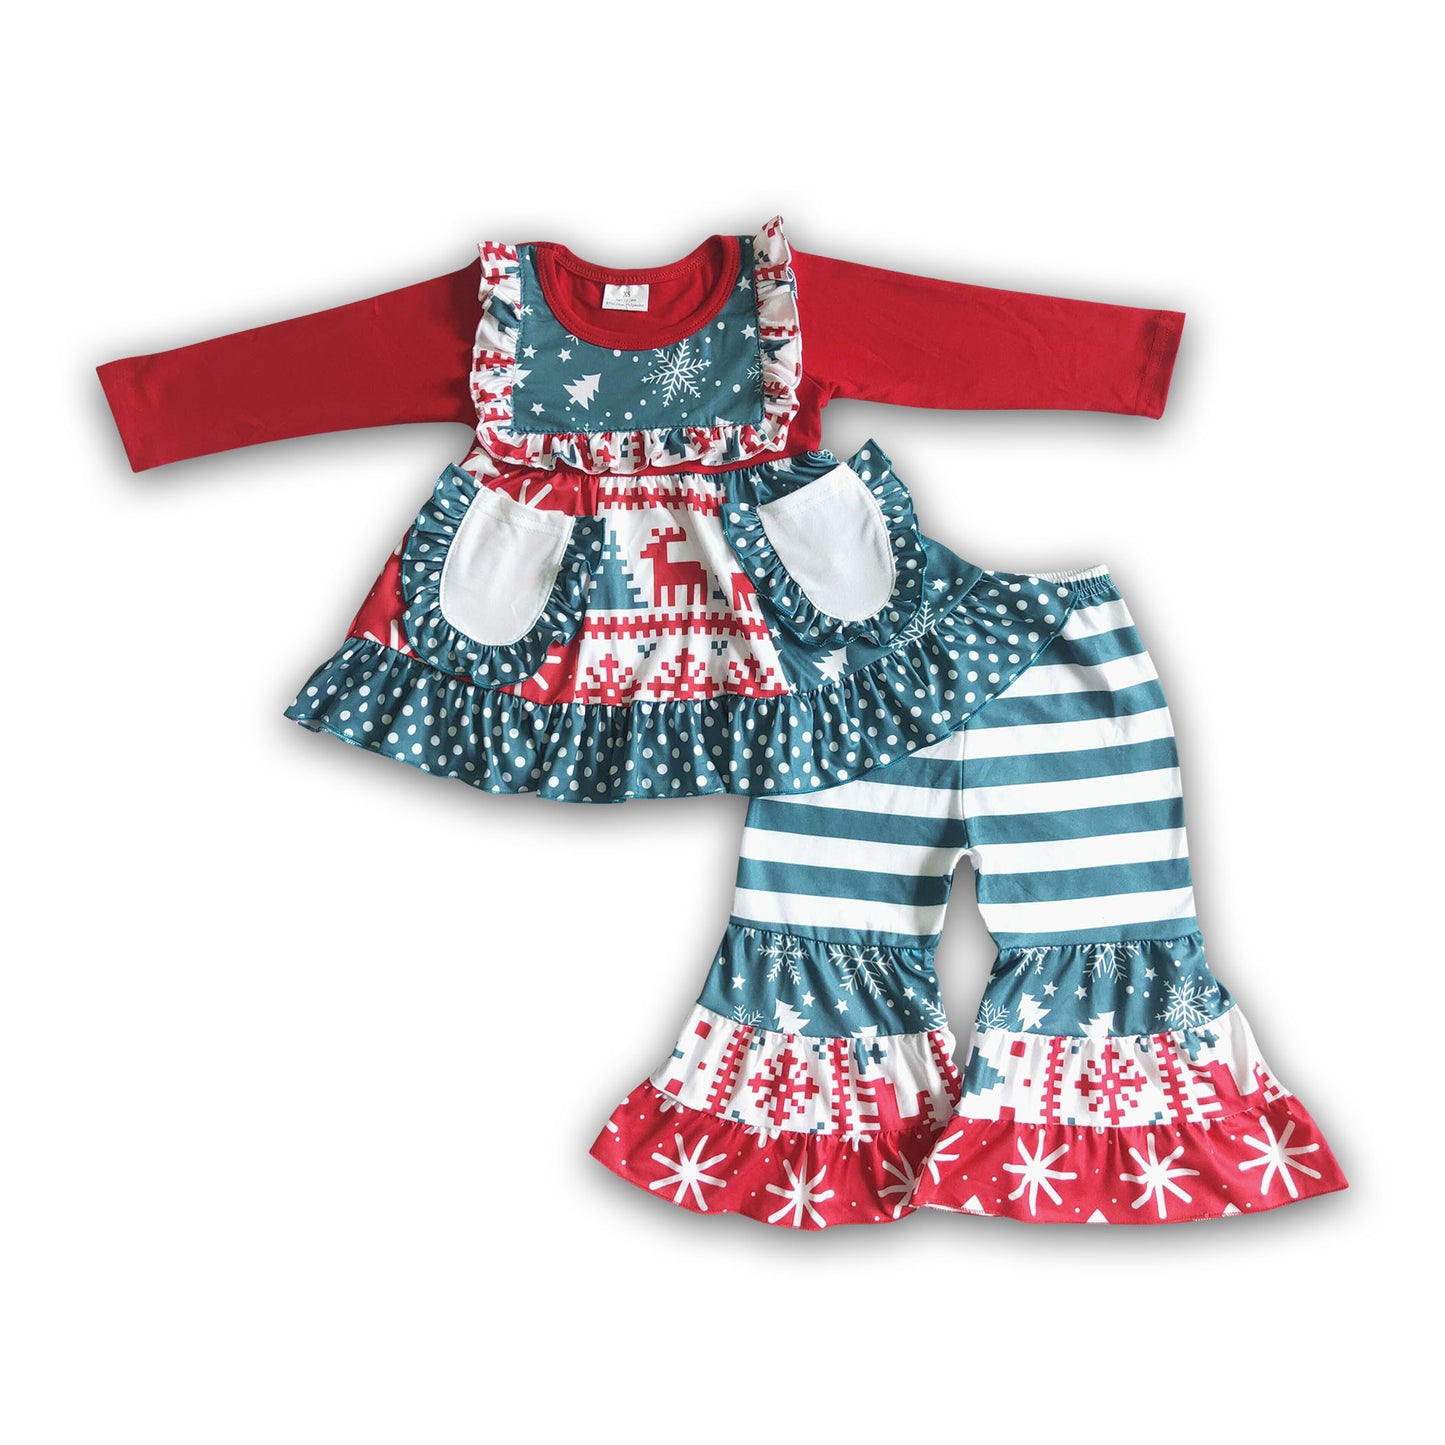 Pockets patchwork girls Christmas outfits